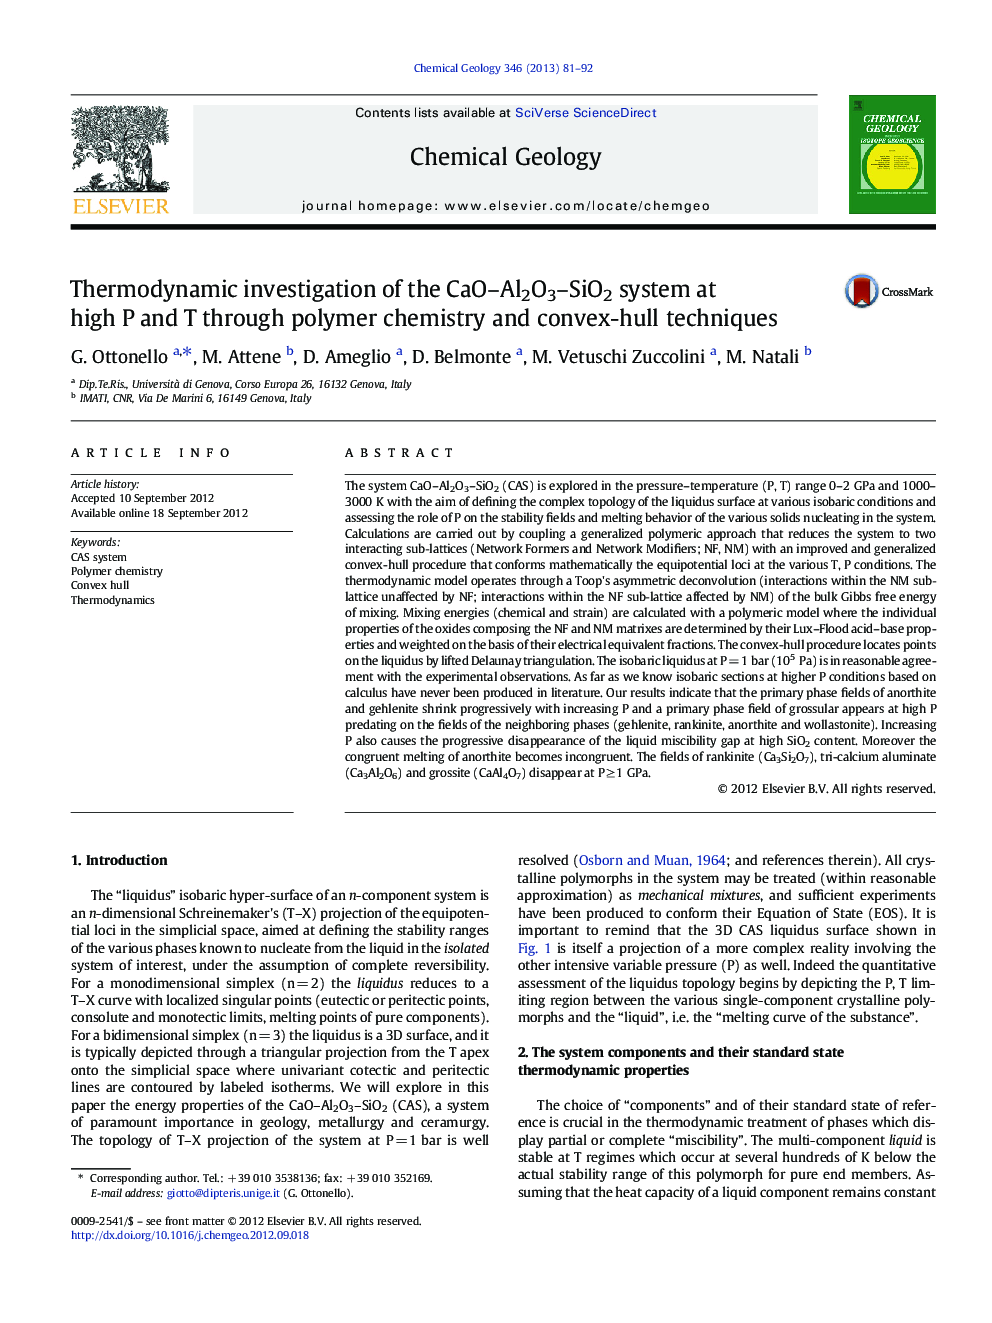 Thermodynamic investigation of the CaO–Al2O3–SiO2 system at high P and T through polymer chemistry and convex-hull techniques